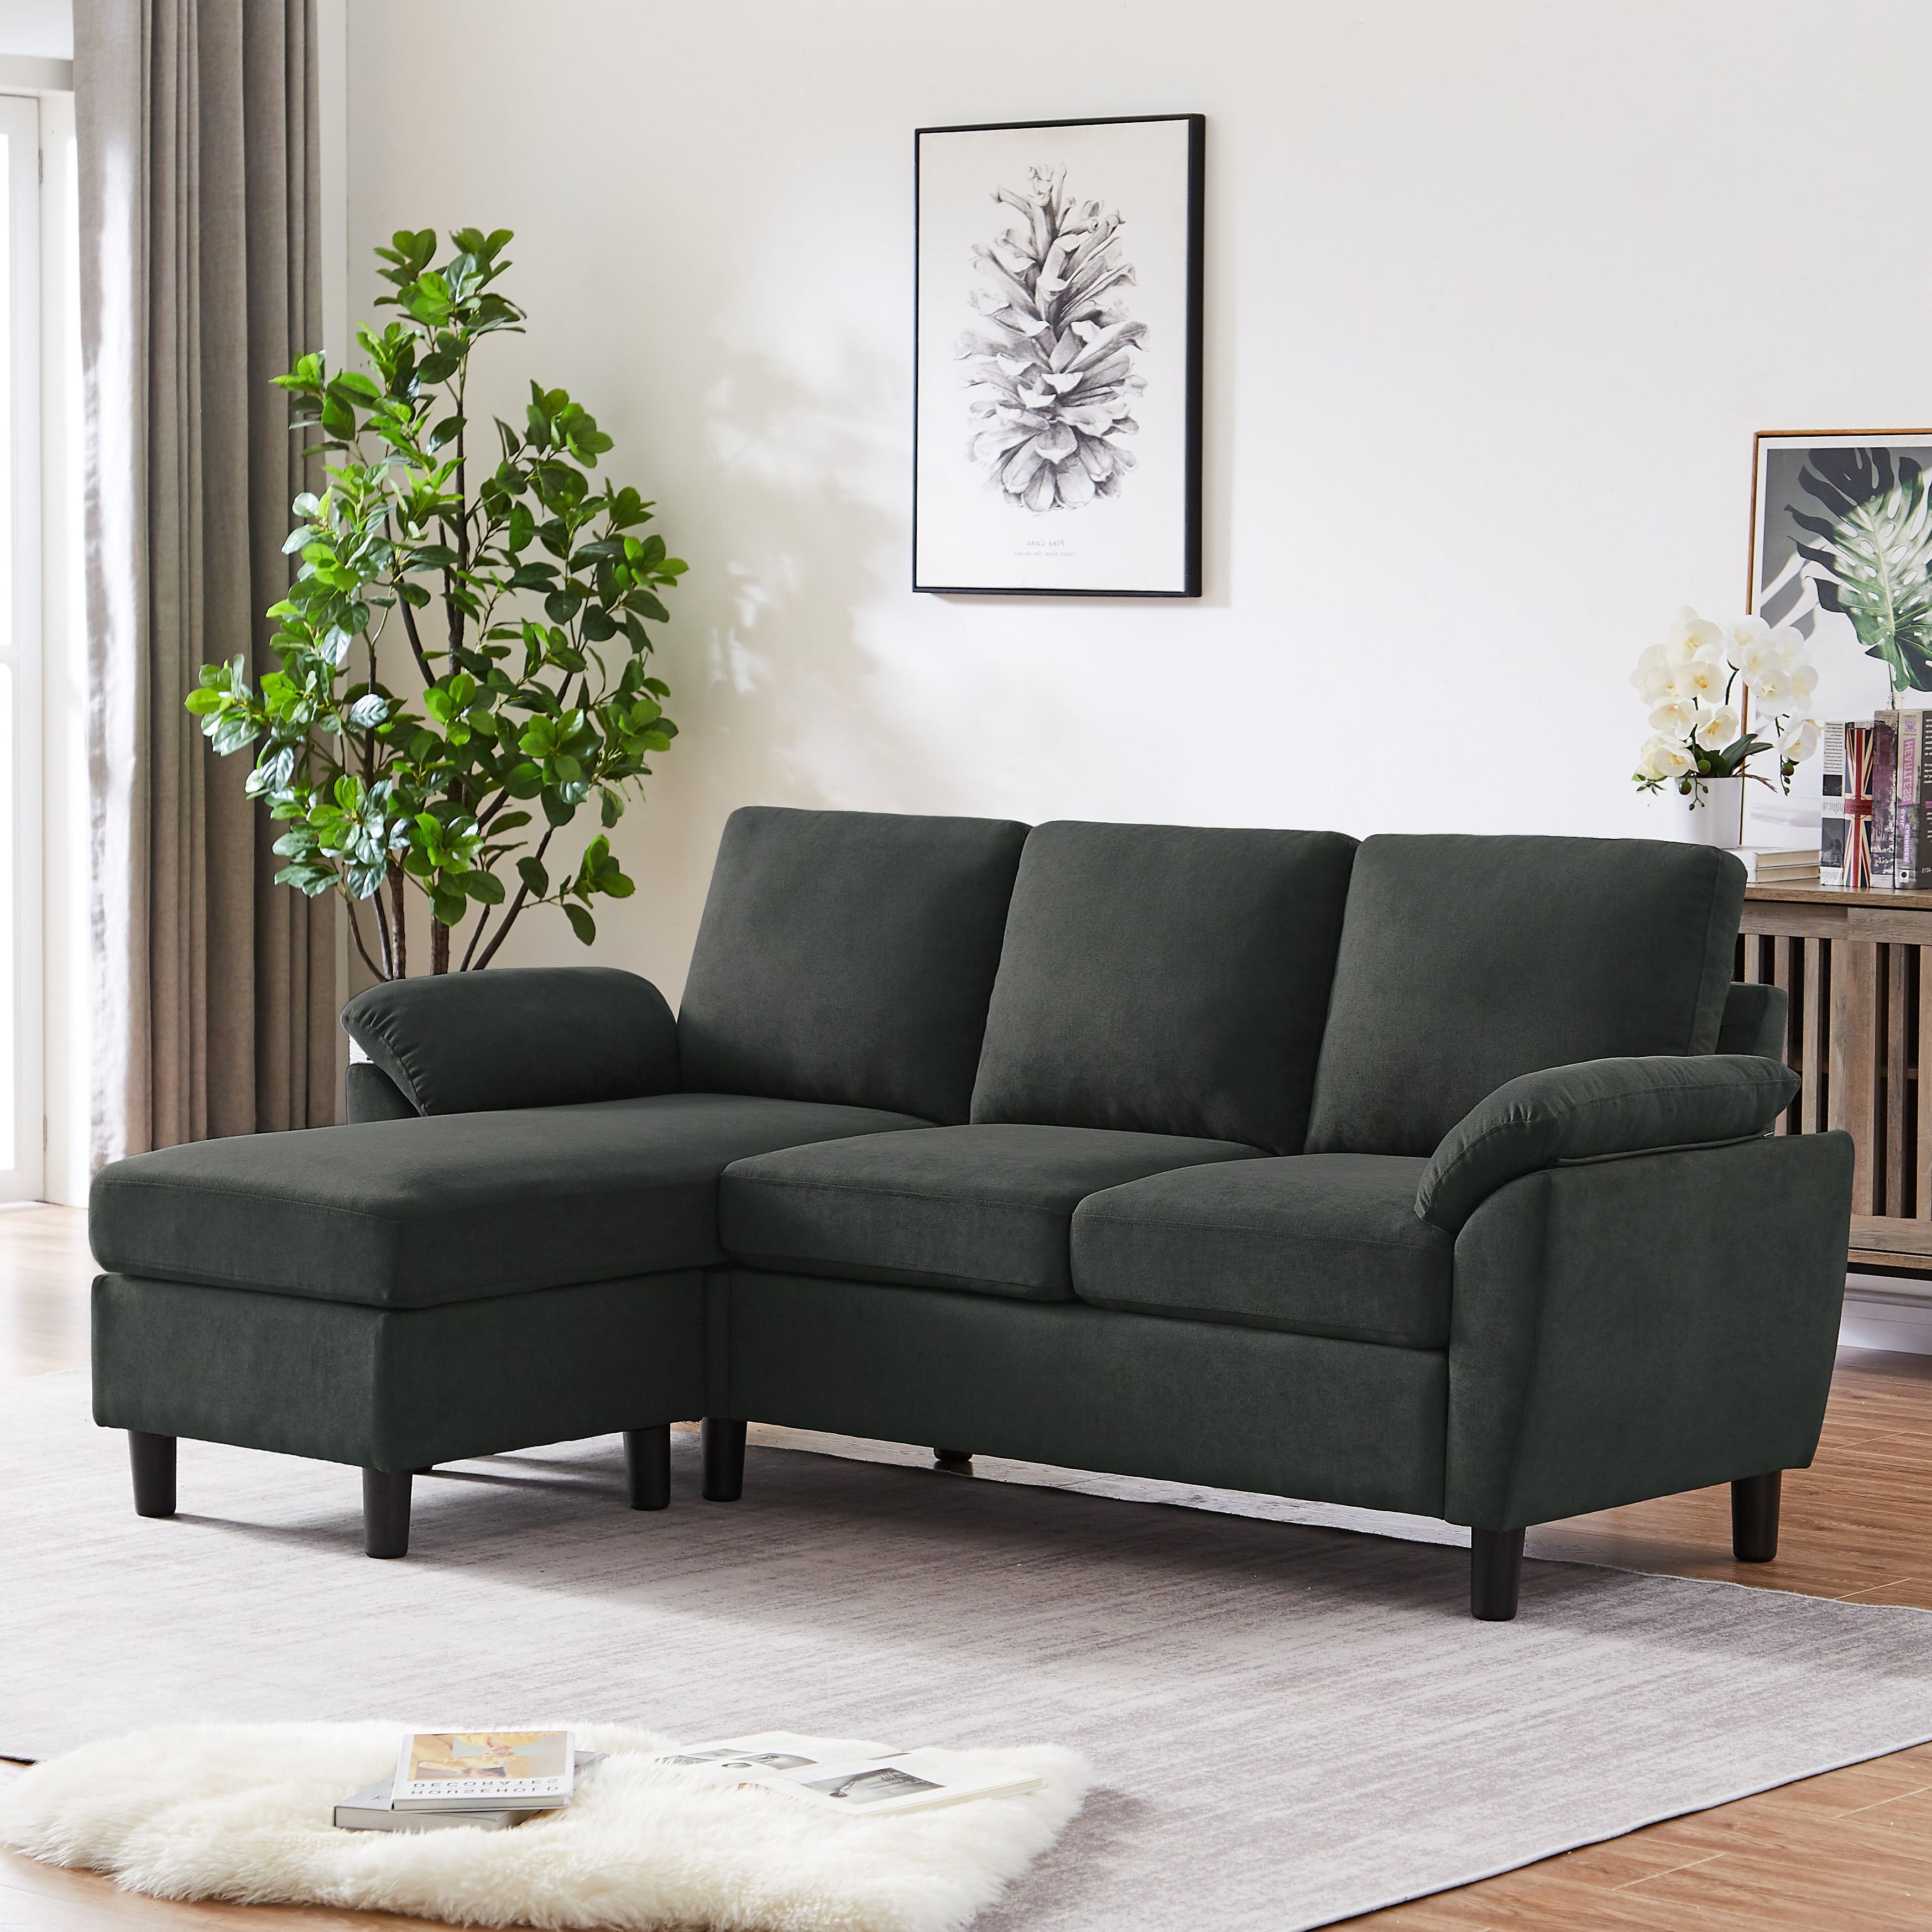 Jarenie Modern Fabric L Shapped Sofa Sectional Couches For Living Room Convertible  Sofa With Matching Chaise For Office, Apartment, Studio – Walmart With Regard To Convertible Sofas With Matching Chaise (Gallery 2 of 20)